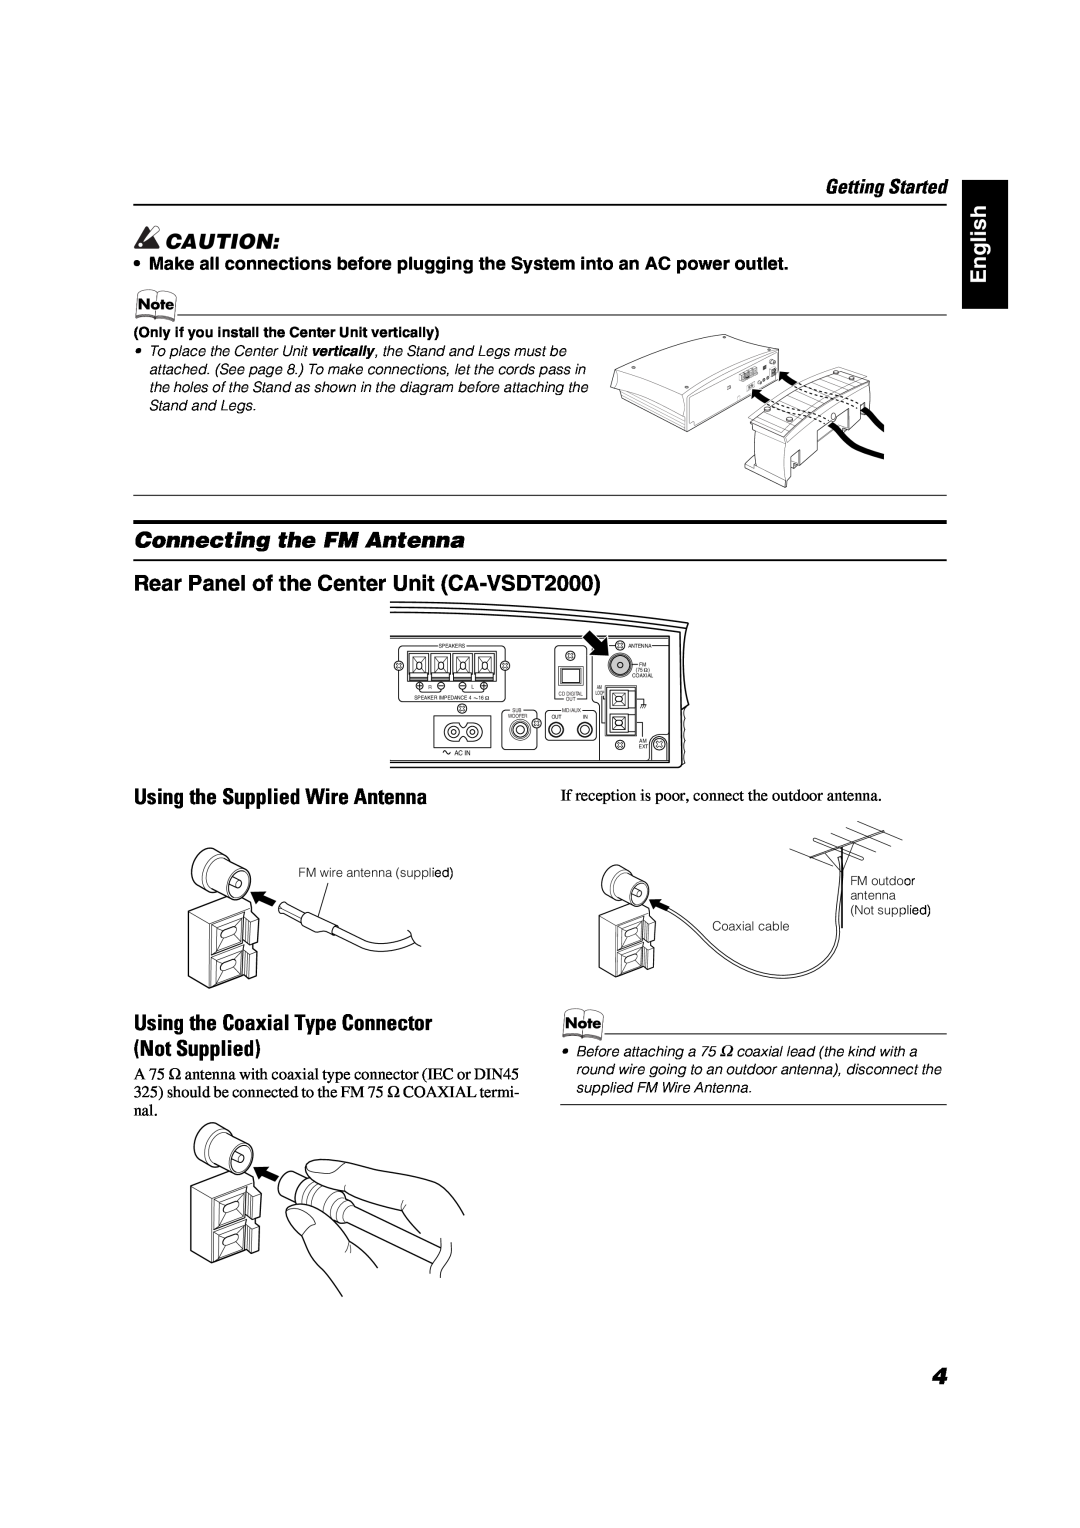 JVC VS-DT2000 manual English, Connecting the FM Antenna, Using the Supplied Wire Antenna, Getting Started 